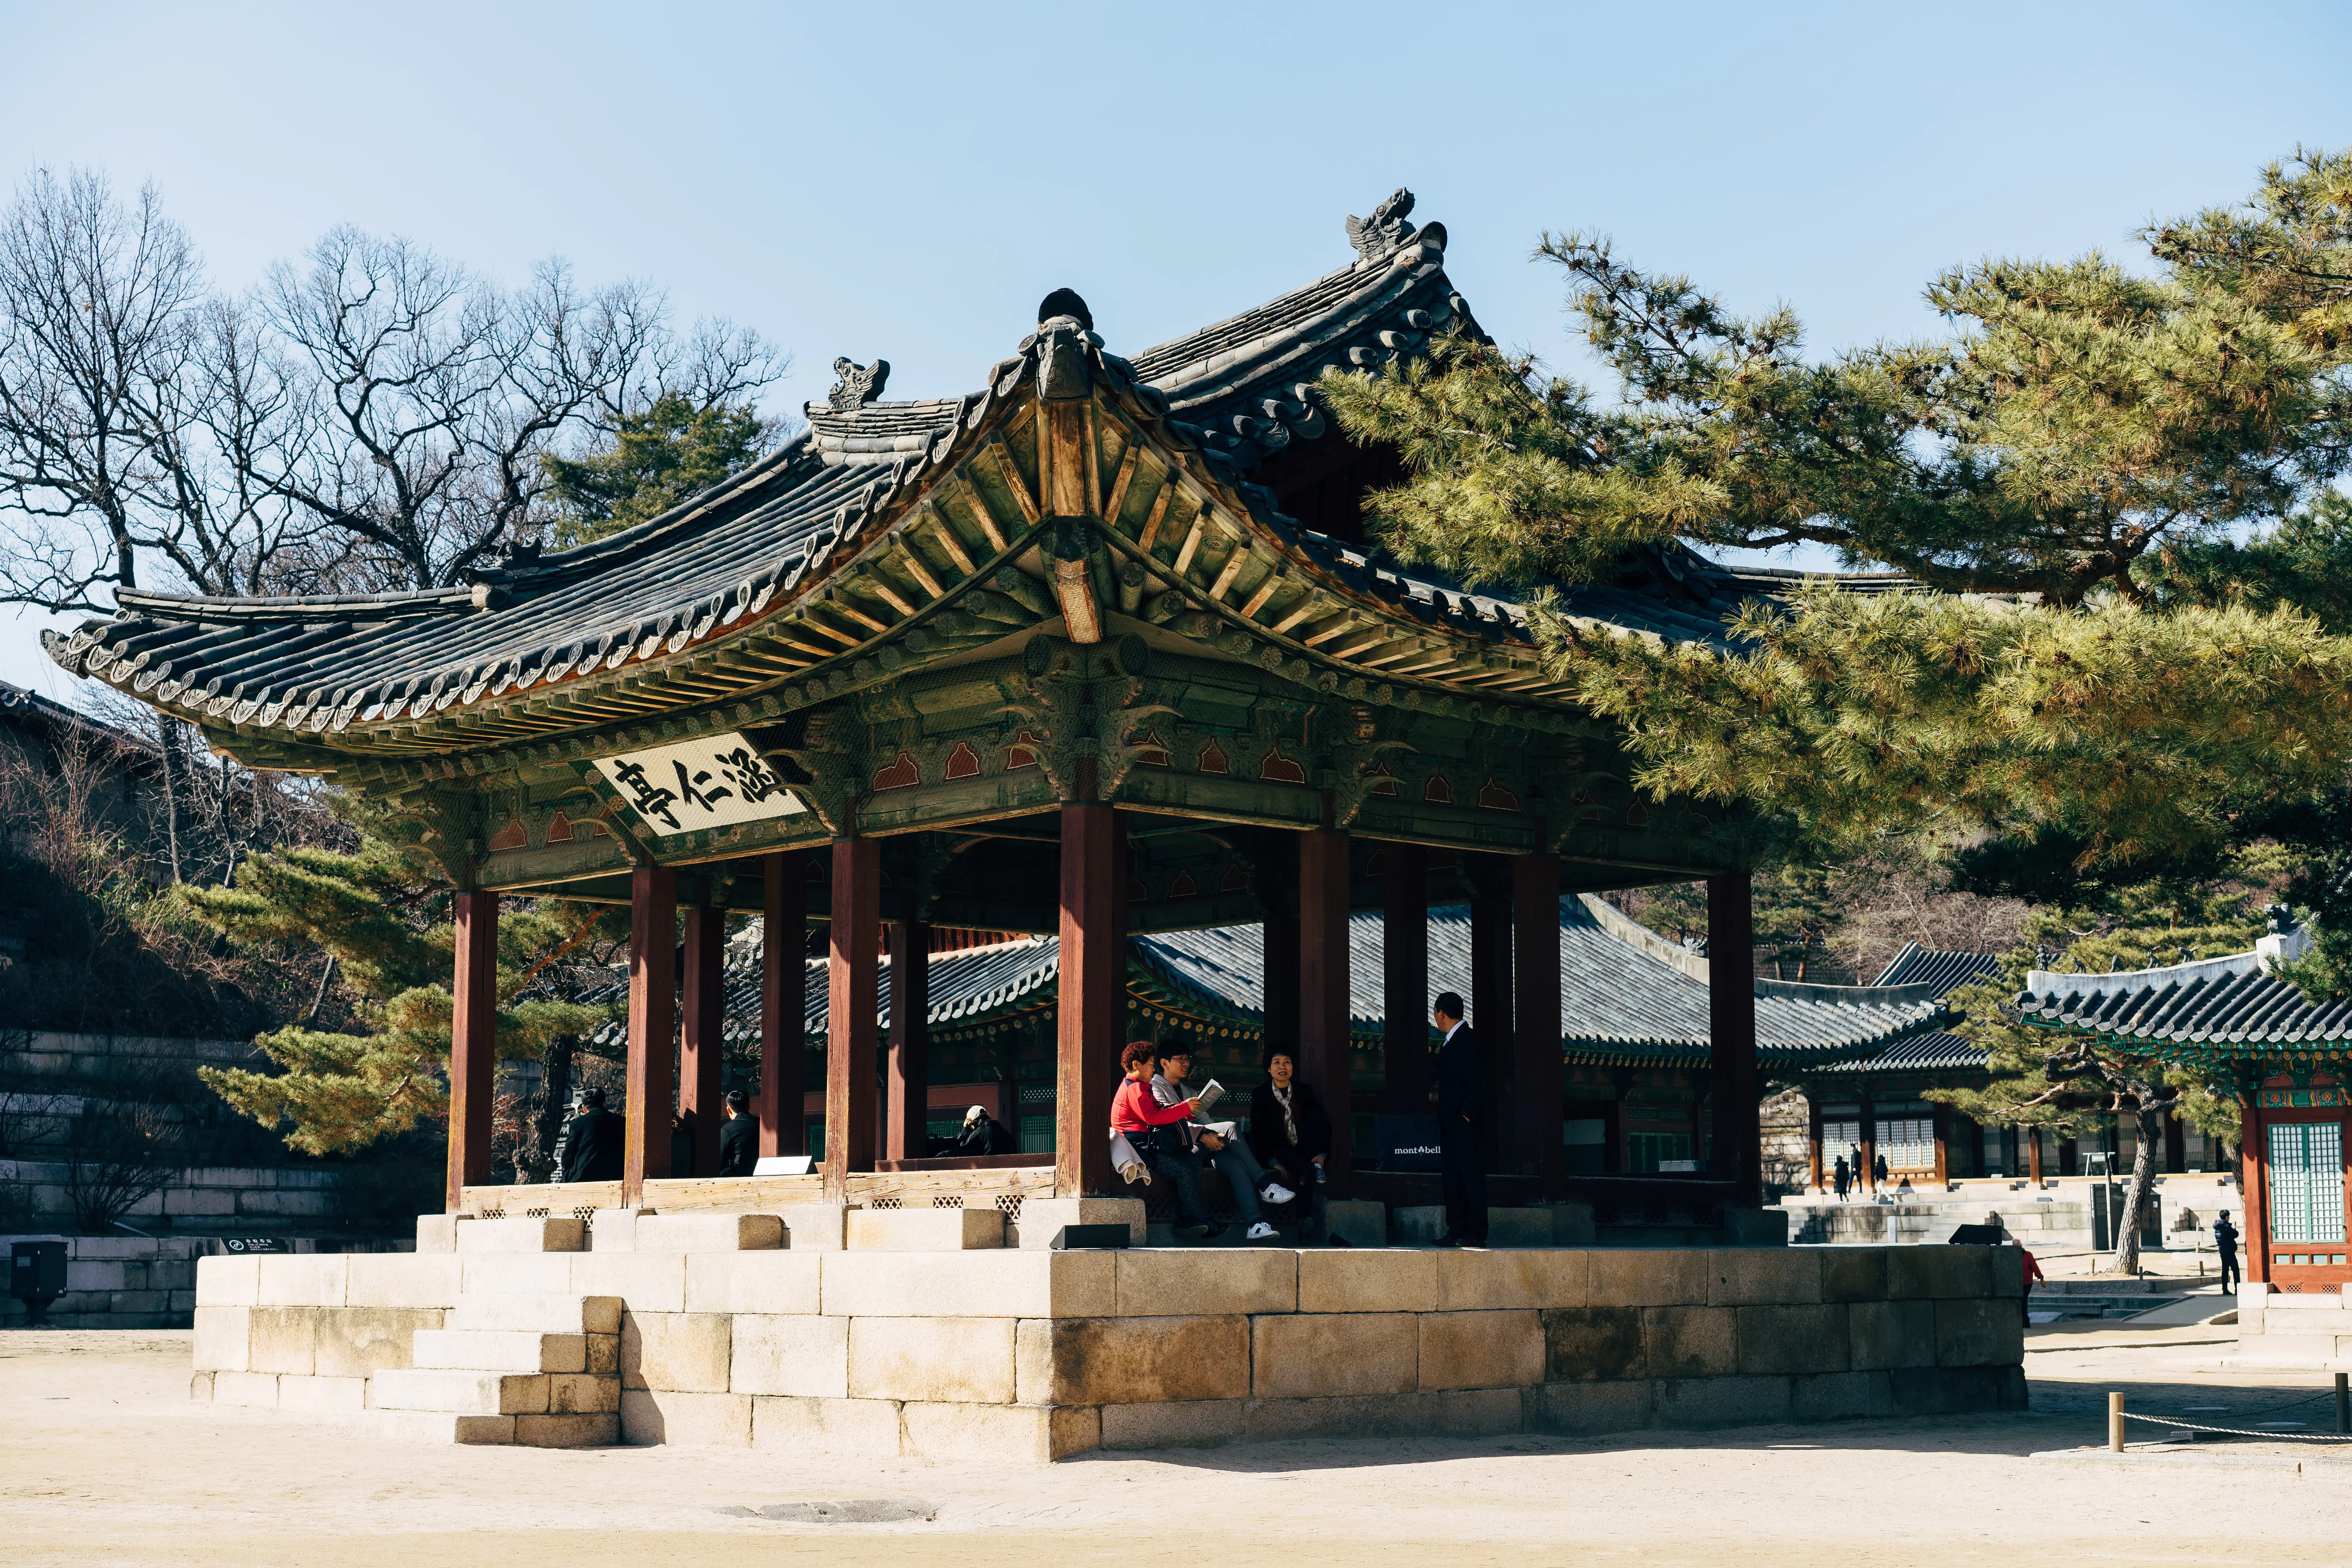 Visit the 5 Royal Palaces in Seoul, South Korea